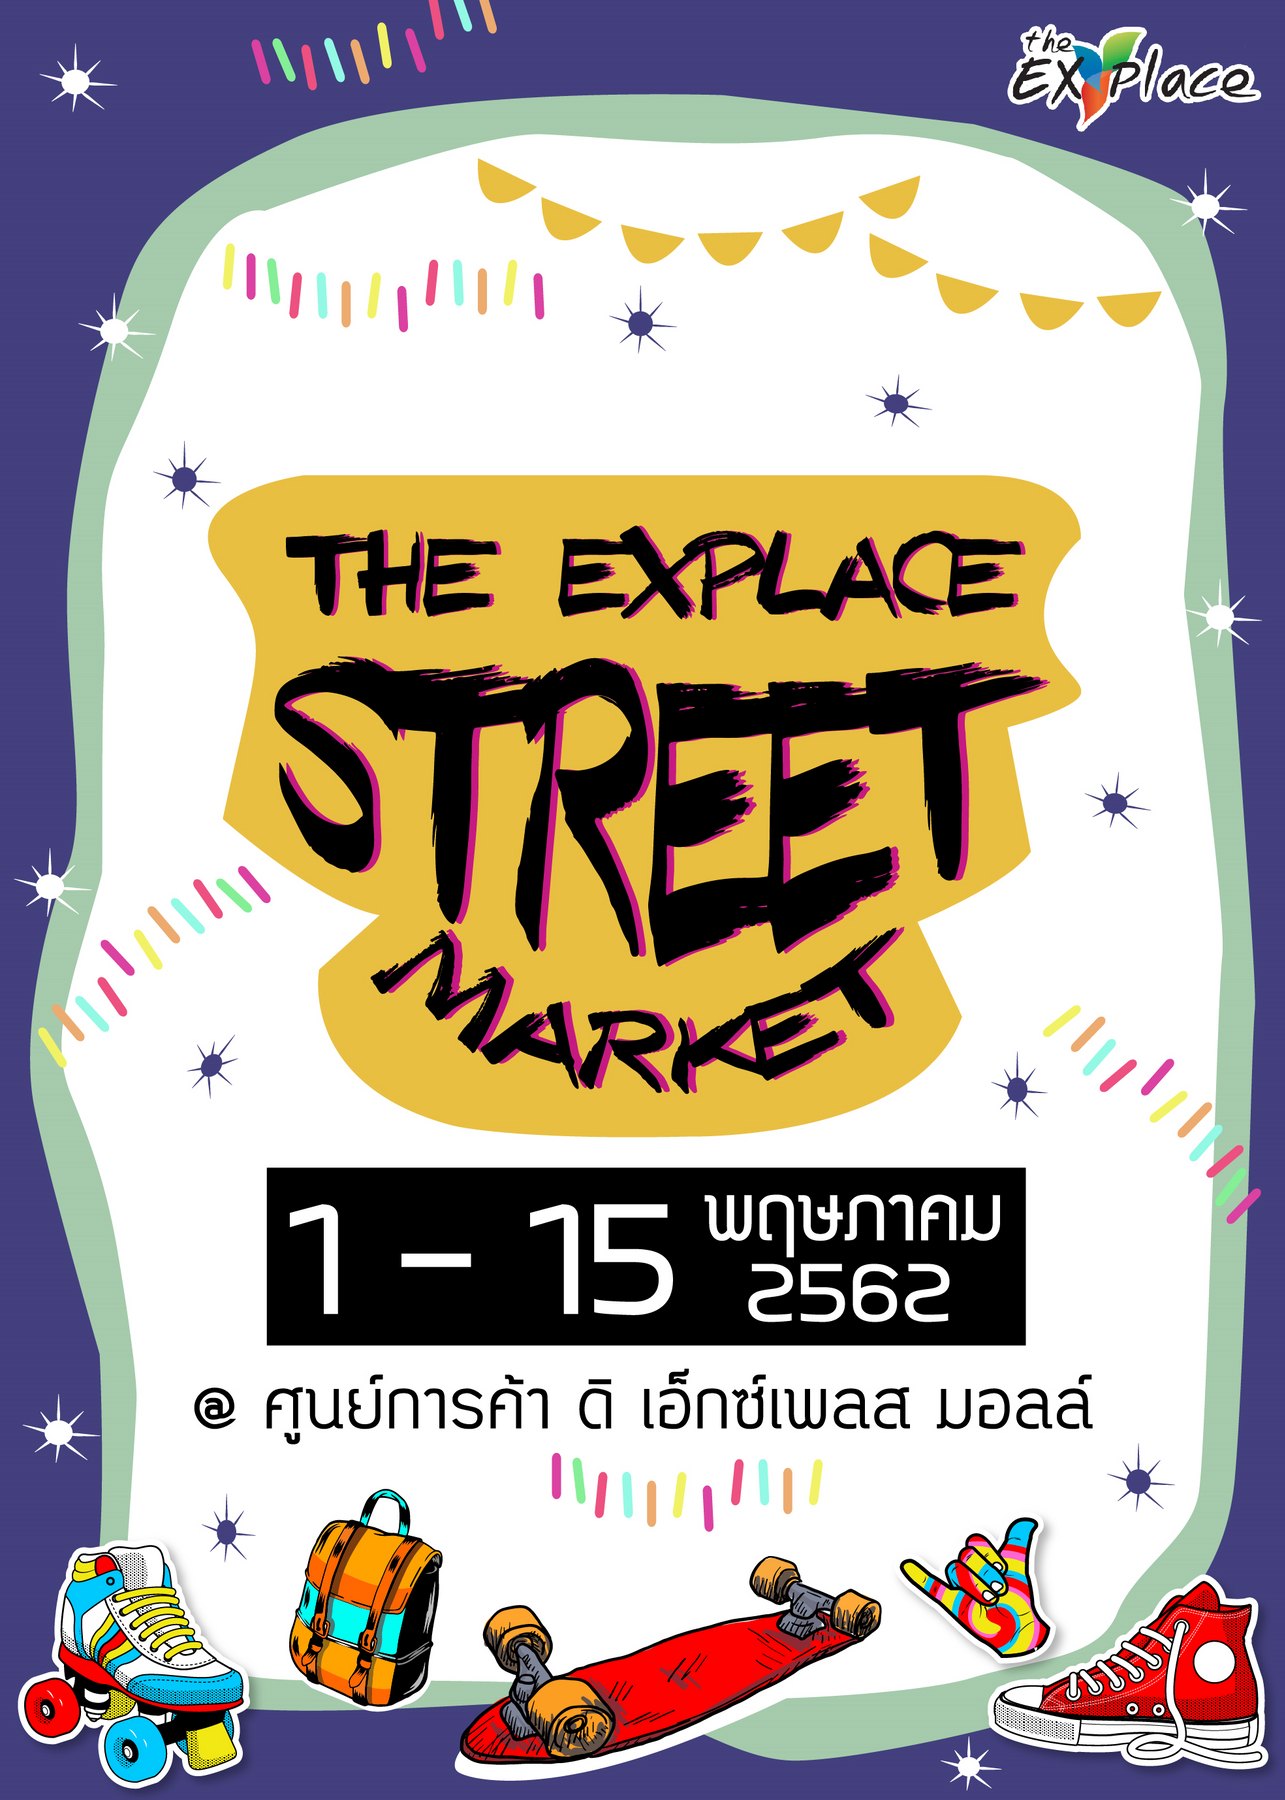 The Explace Street Market